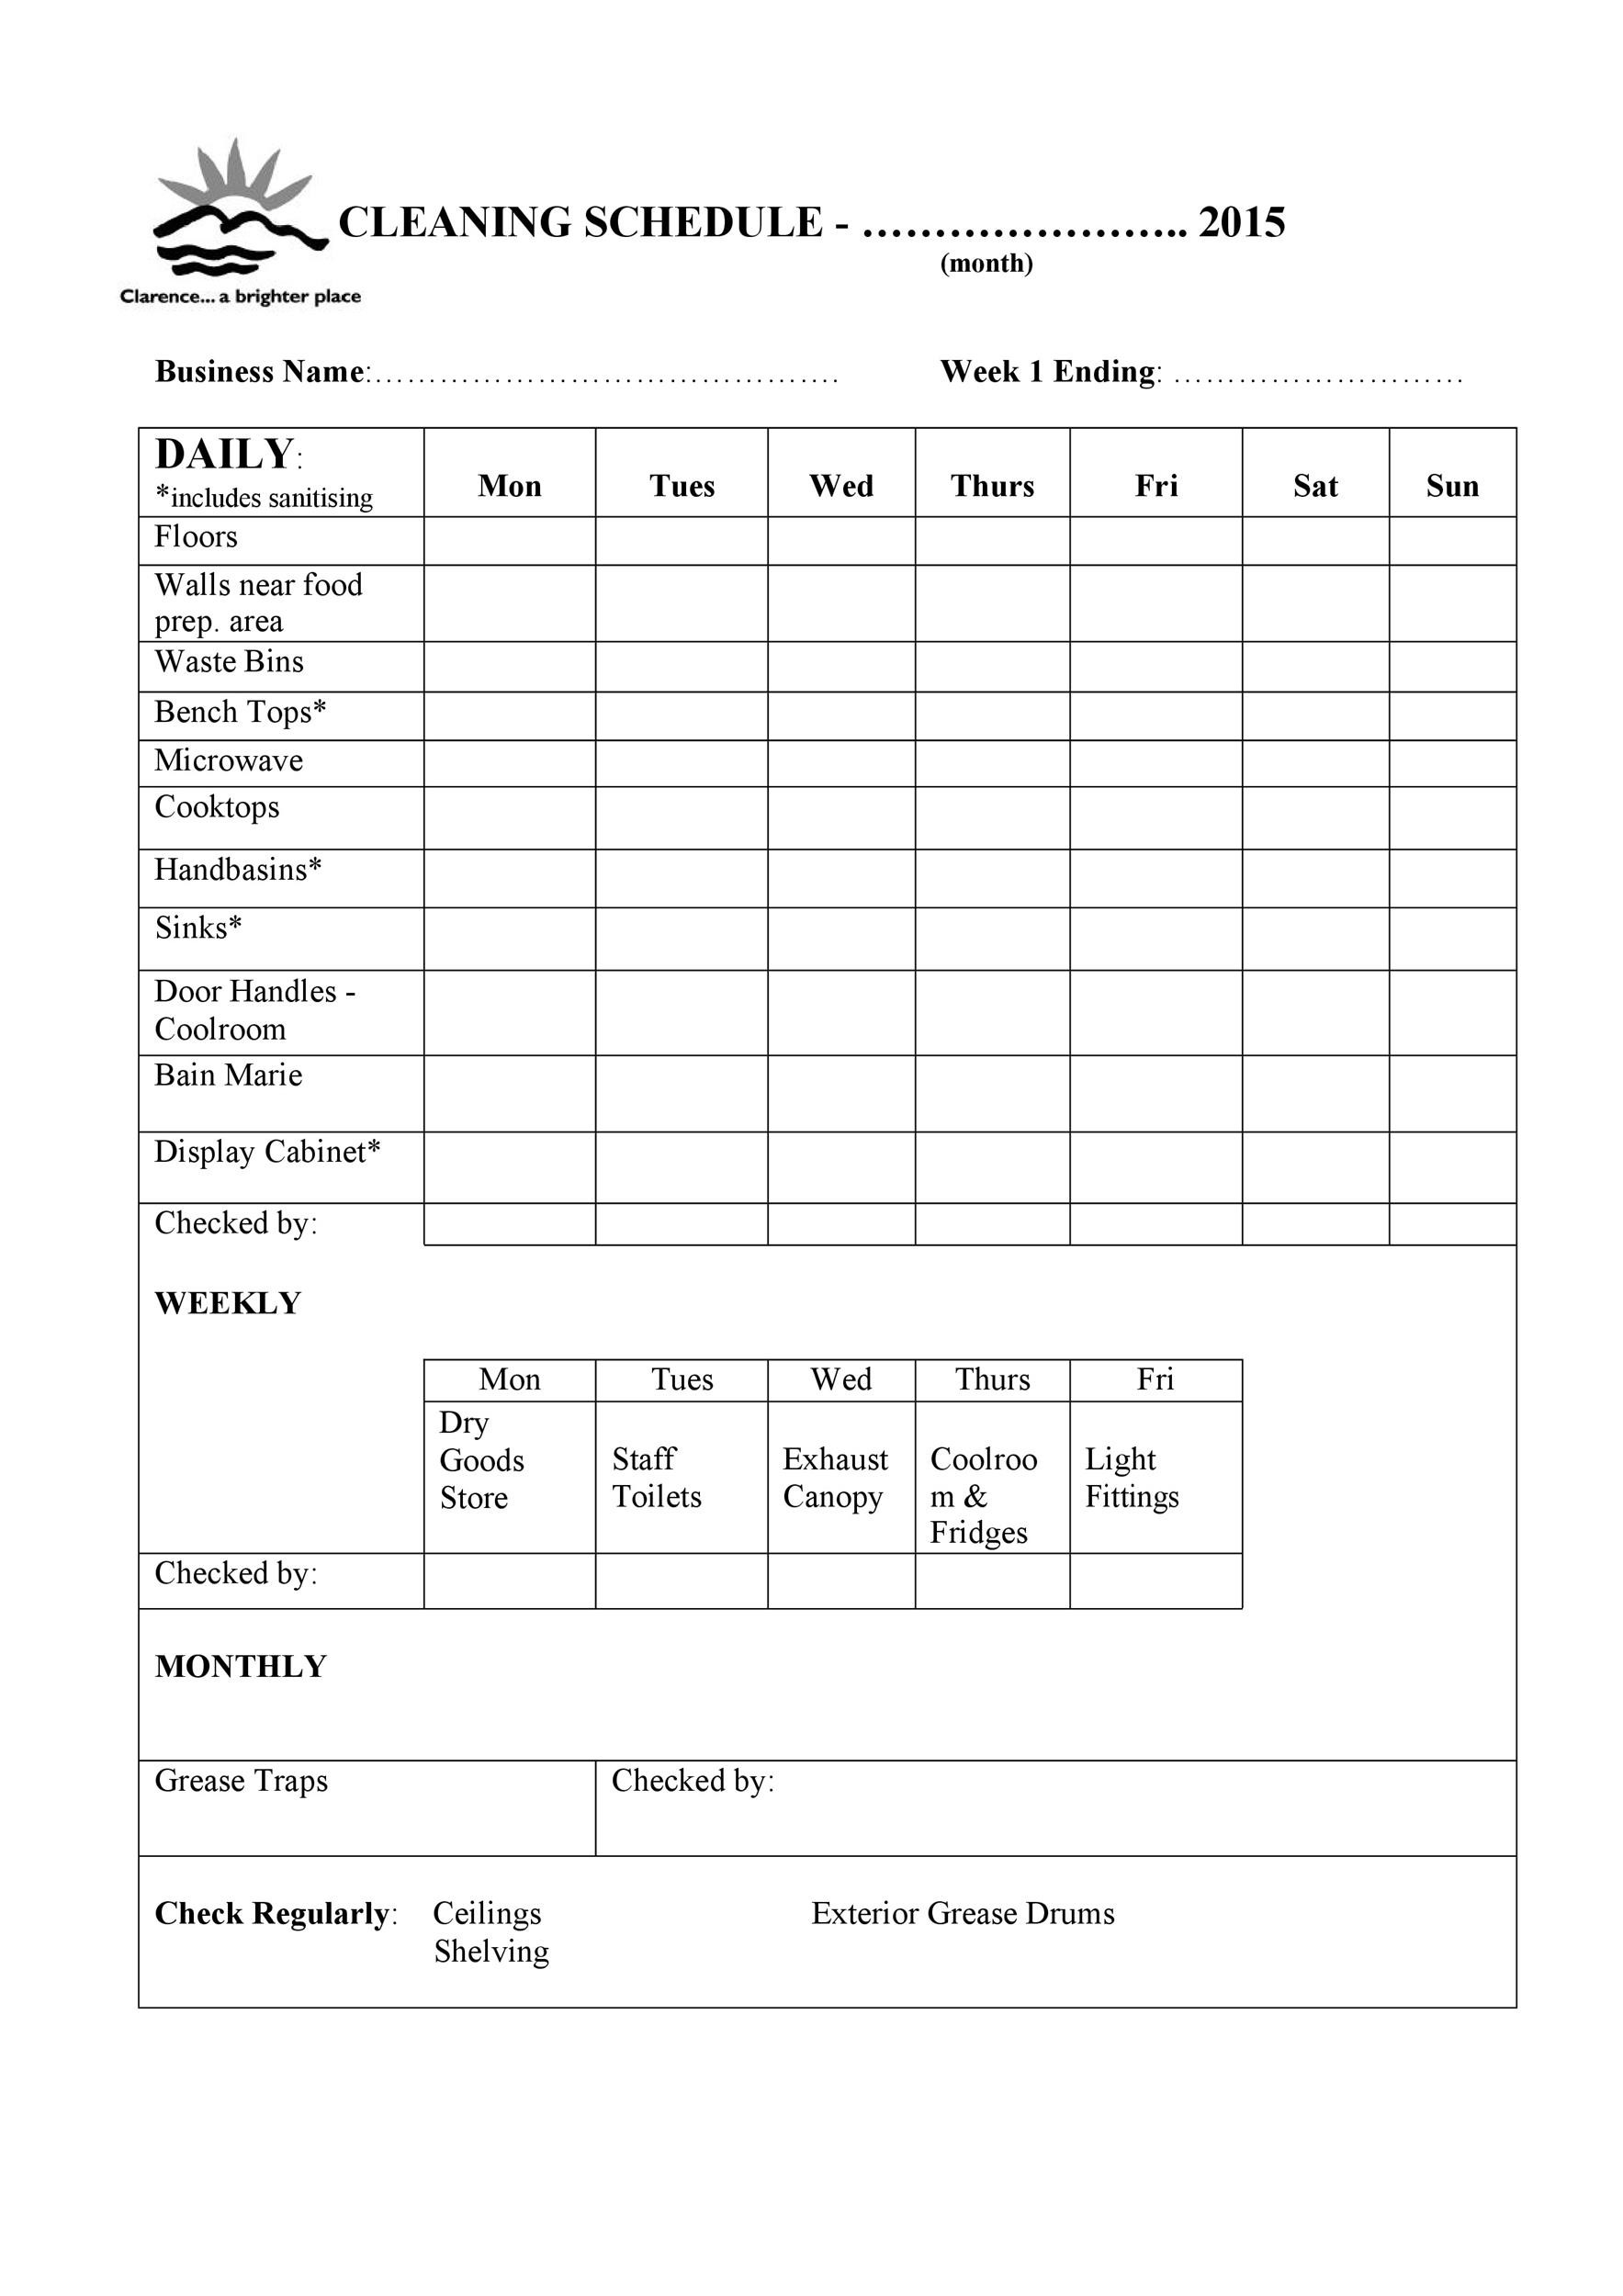 11 Printable House Cleaning Checklist Templates ᐅ TemplateLab For Housekeeper Checklist Template For Housekeeper Checklist Template